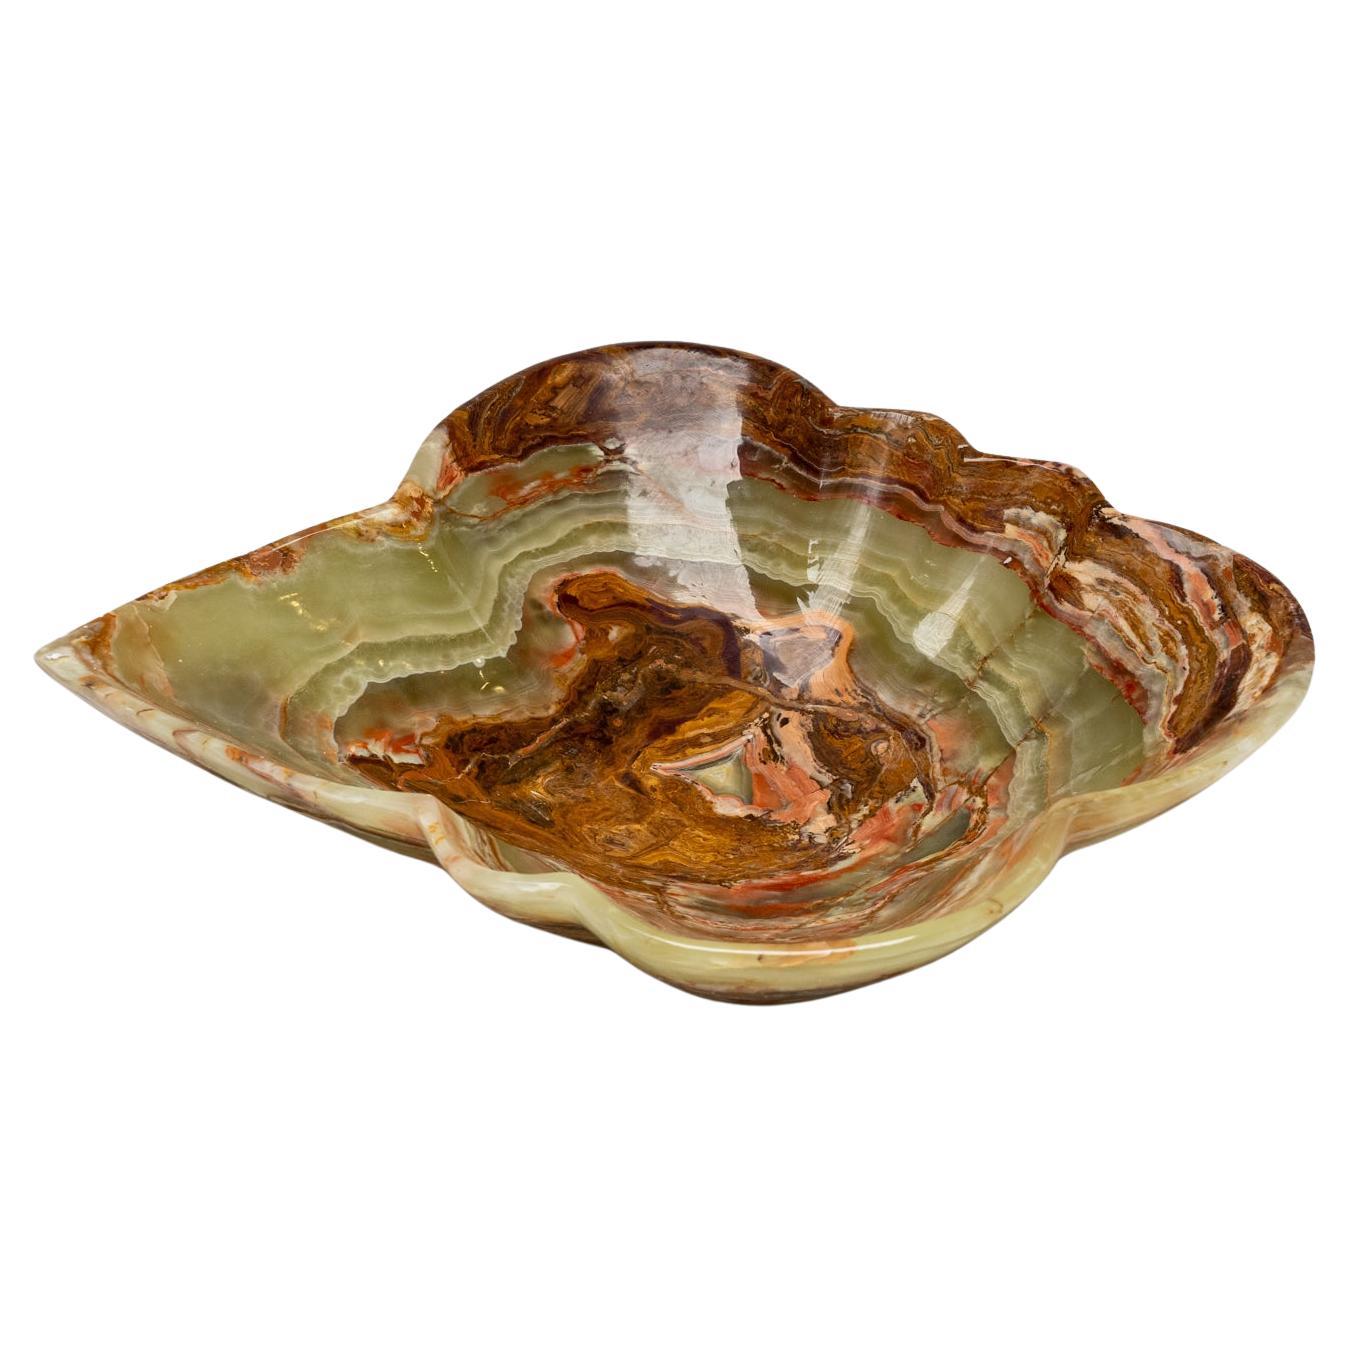 Genuine Polished Green Onyx Bowl from Mexico (9.5 lbs)